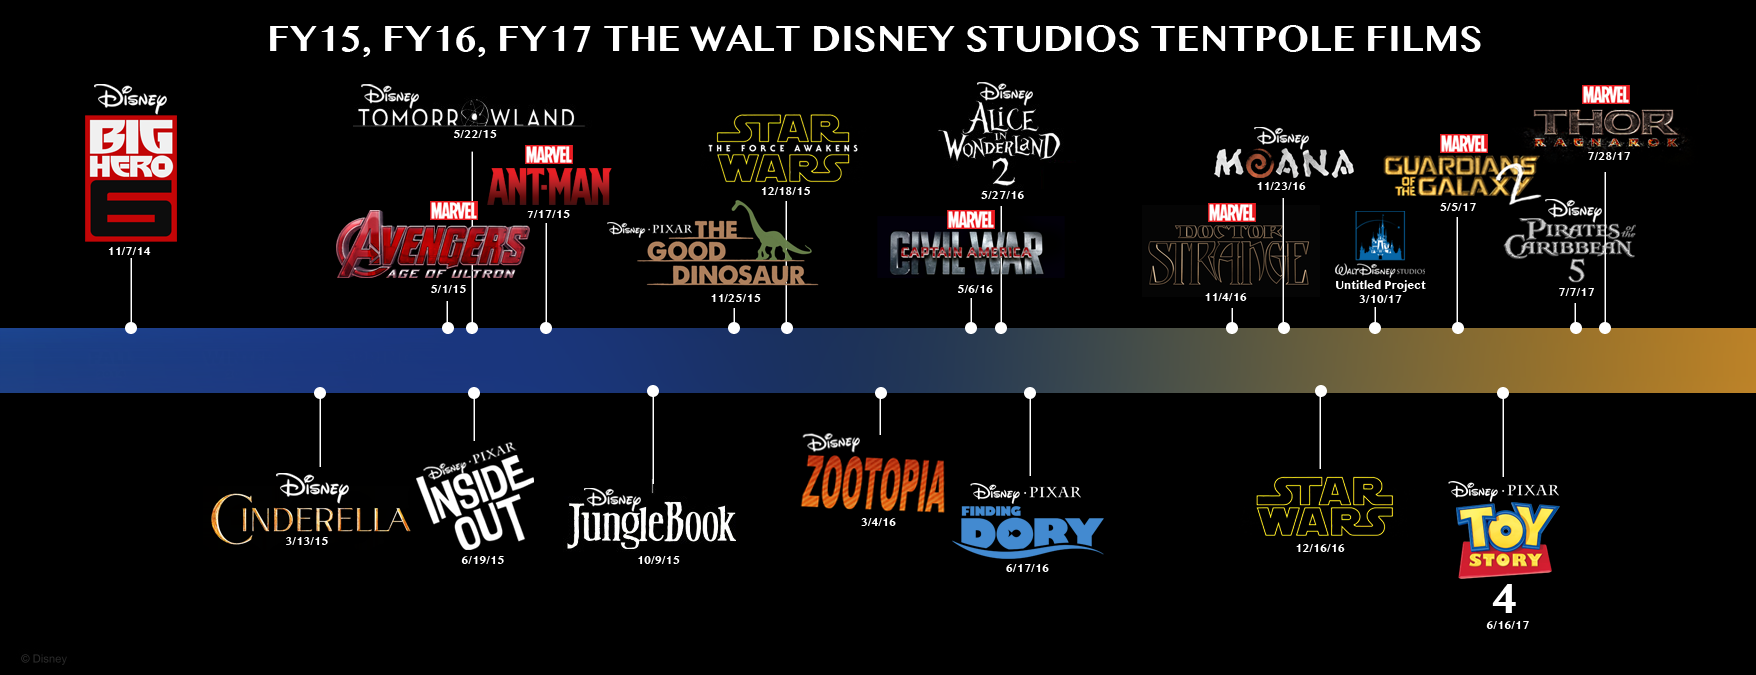 What to expect from disney for the rest of 2016